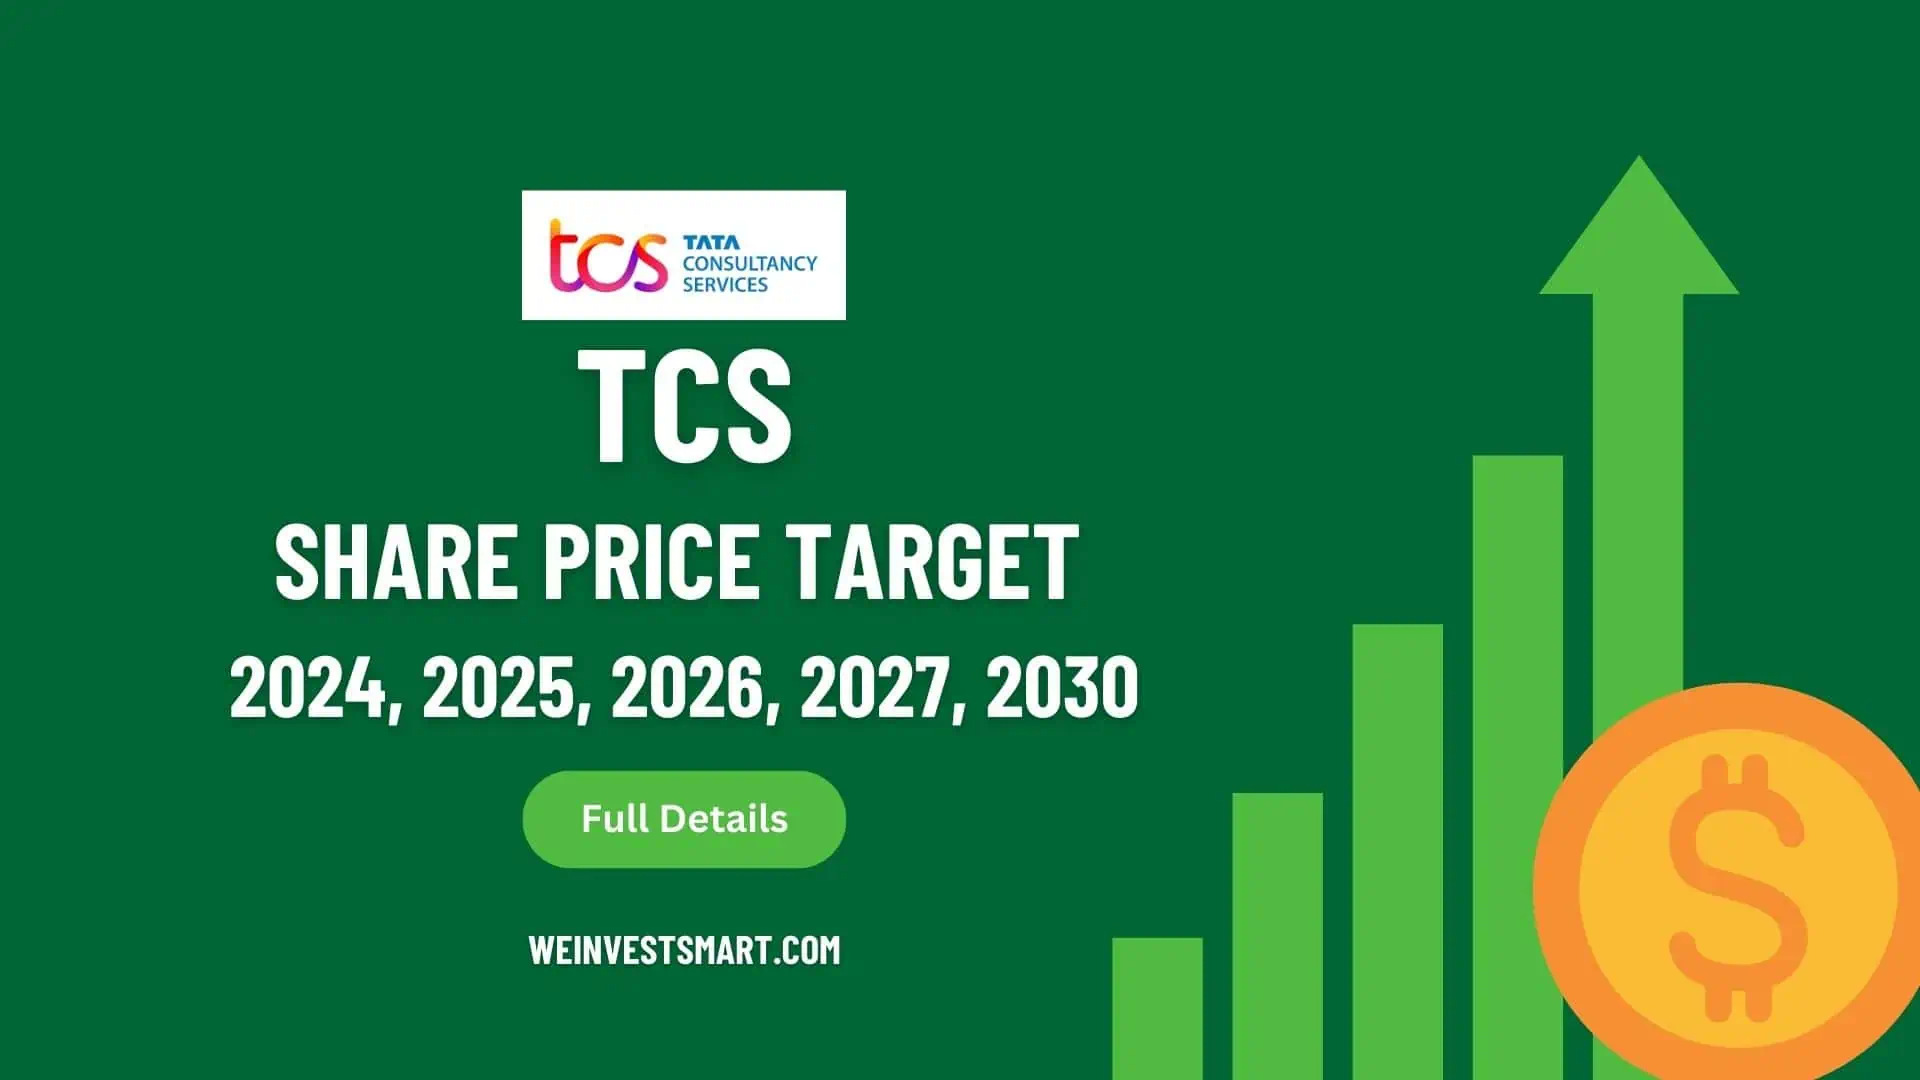 TCS Share Price Target 2024, 2025, 2026, 2027, 2030 Prediction